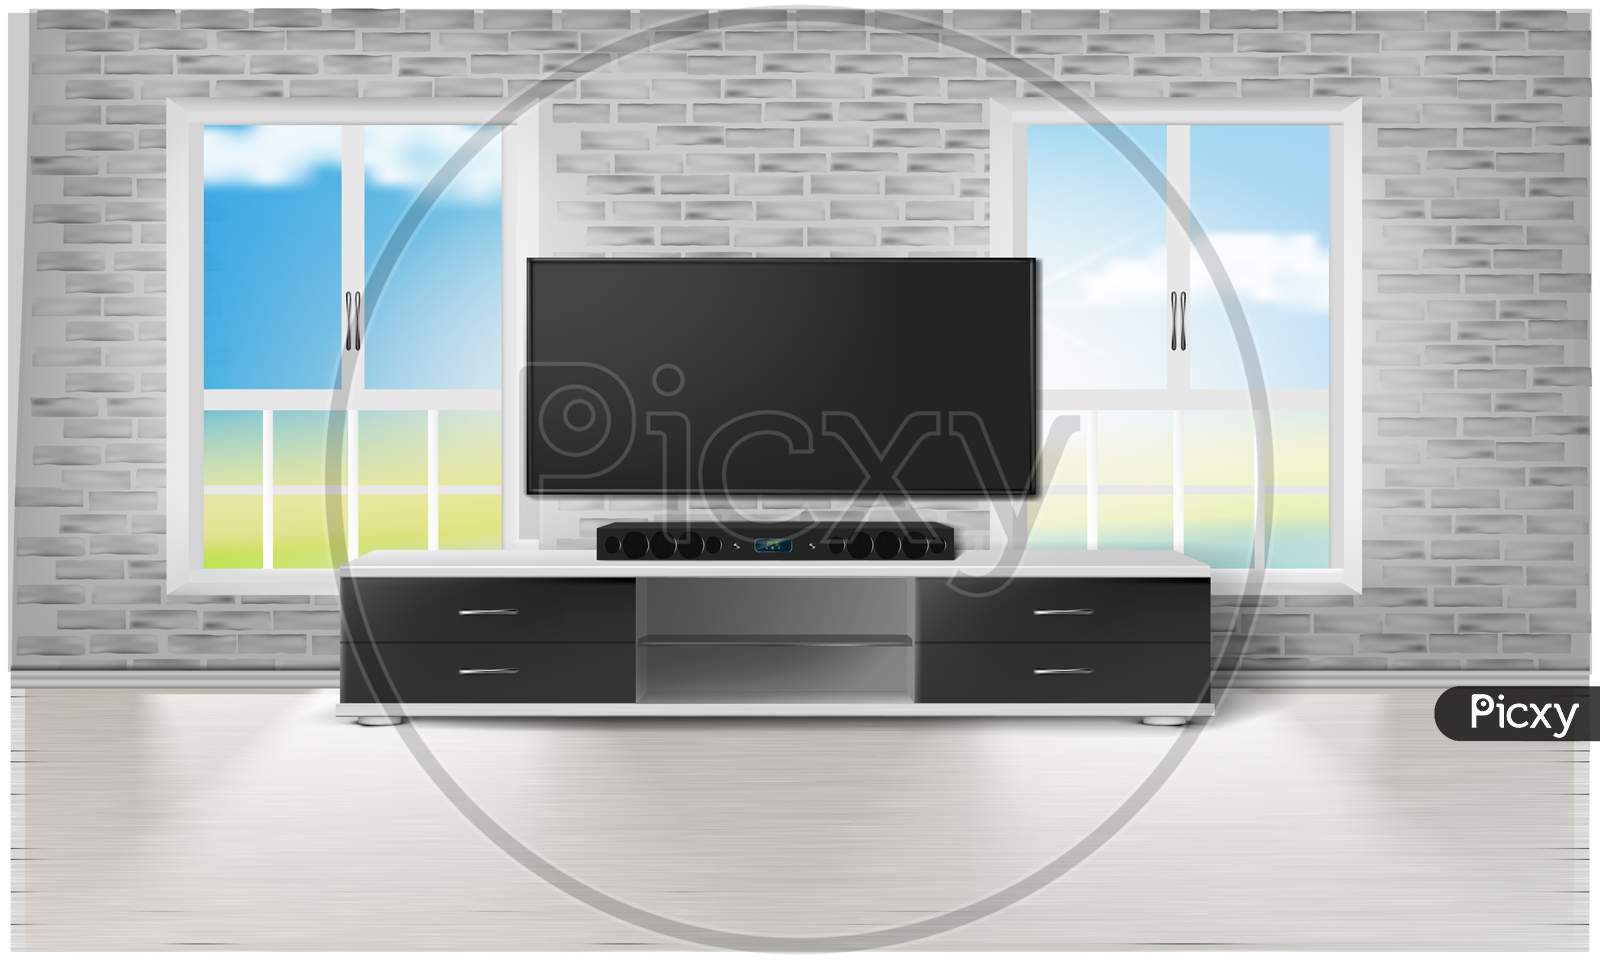 Mock Up Illustration Of Entertainment Set In A Living Room